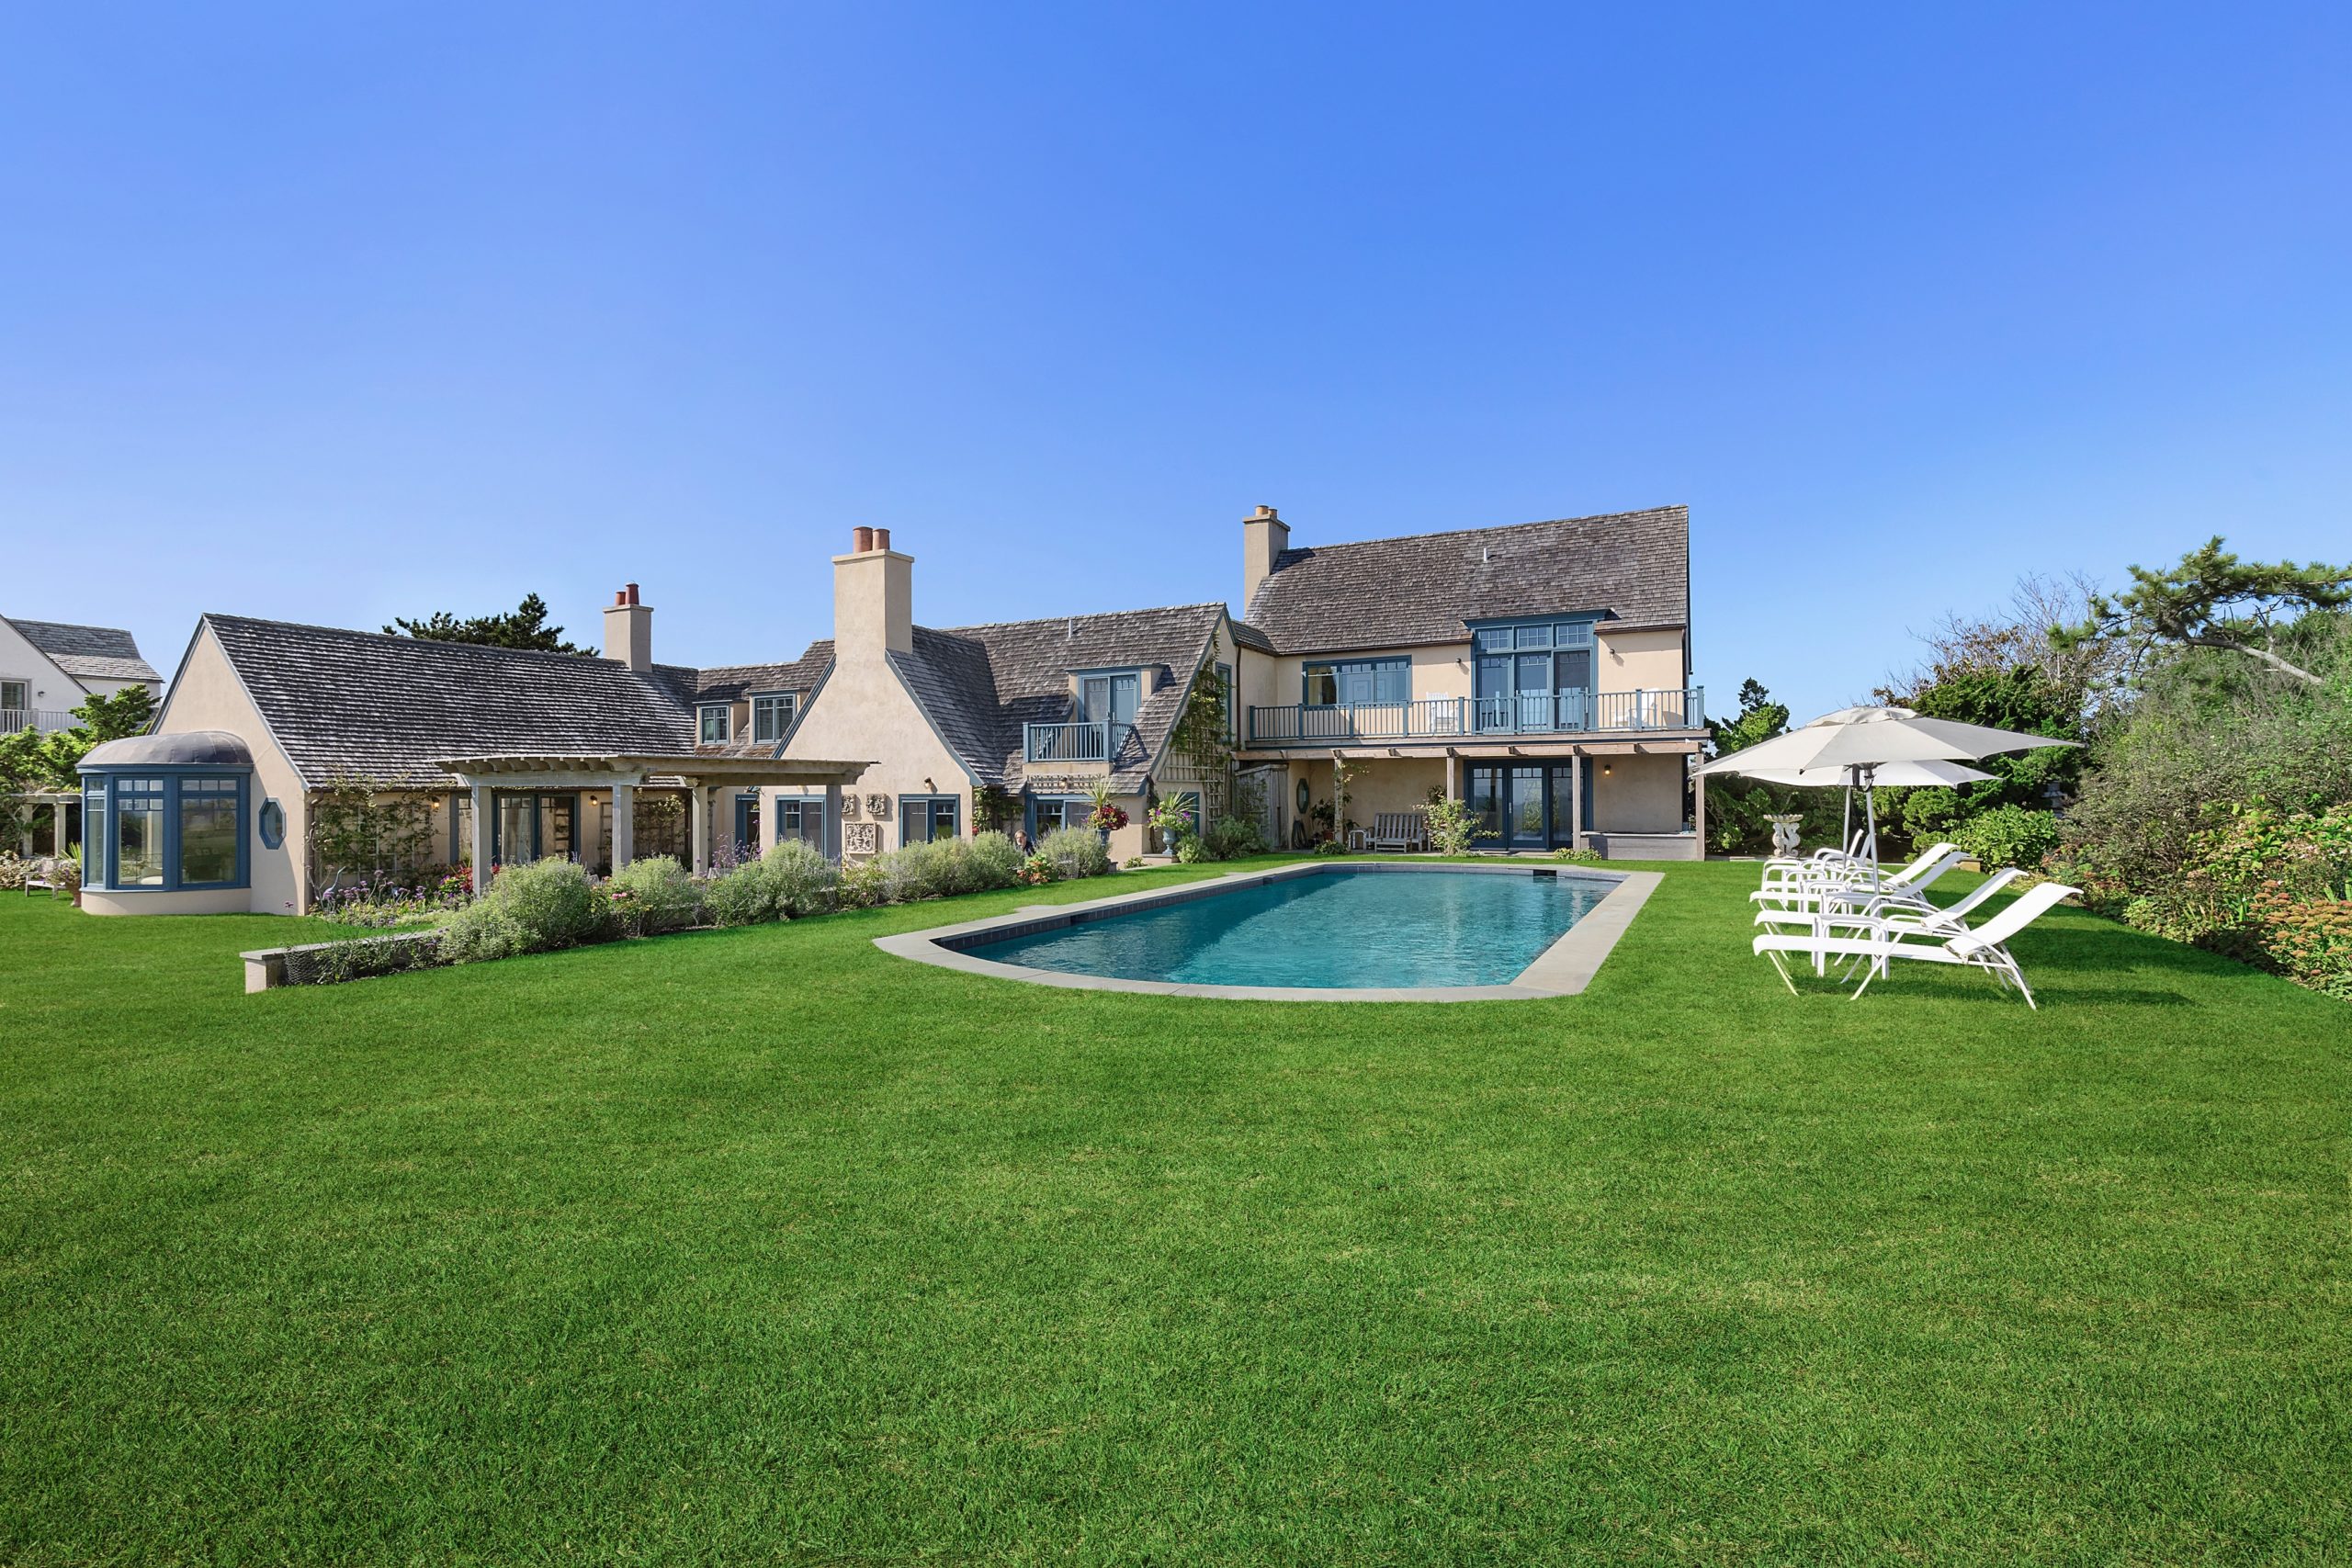 51 West End Road in East Hampton is newly on the market for $60 million. COURTESY DOUGLAS ELLIMAN